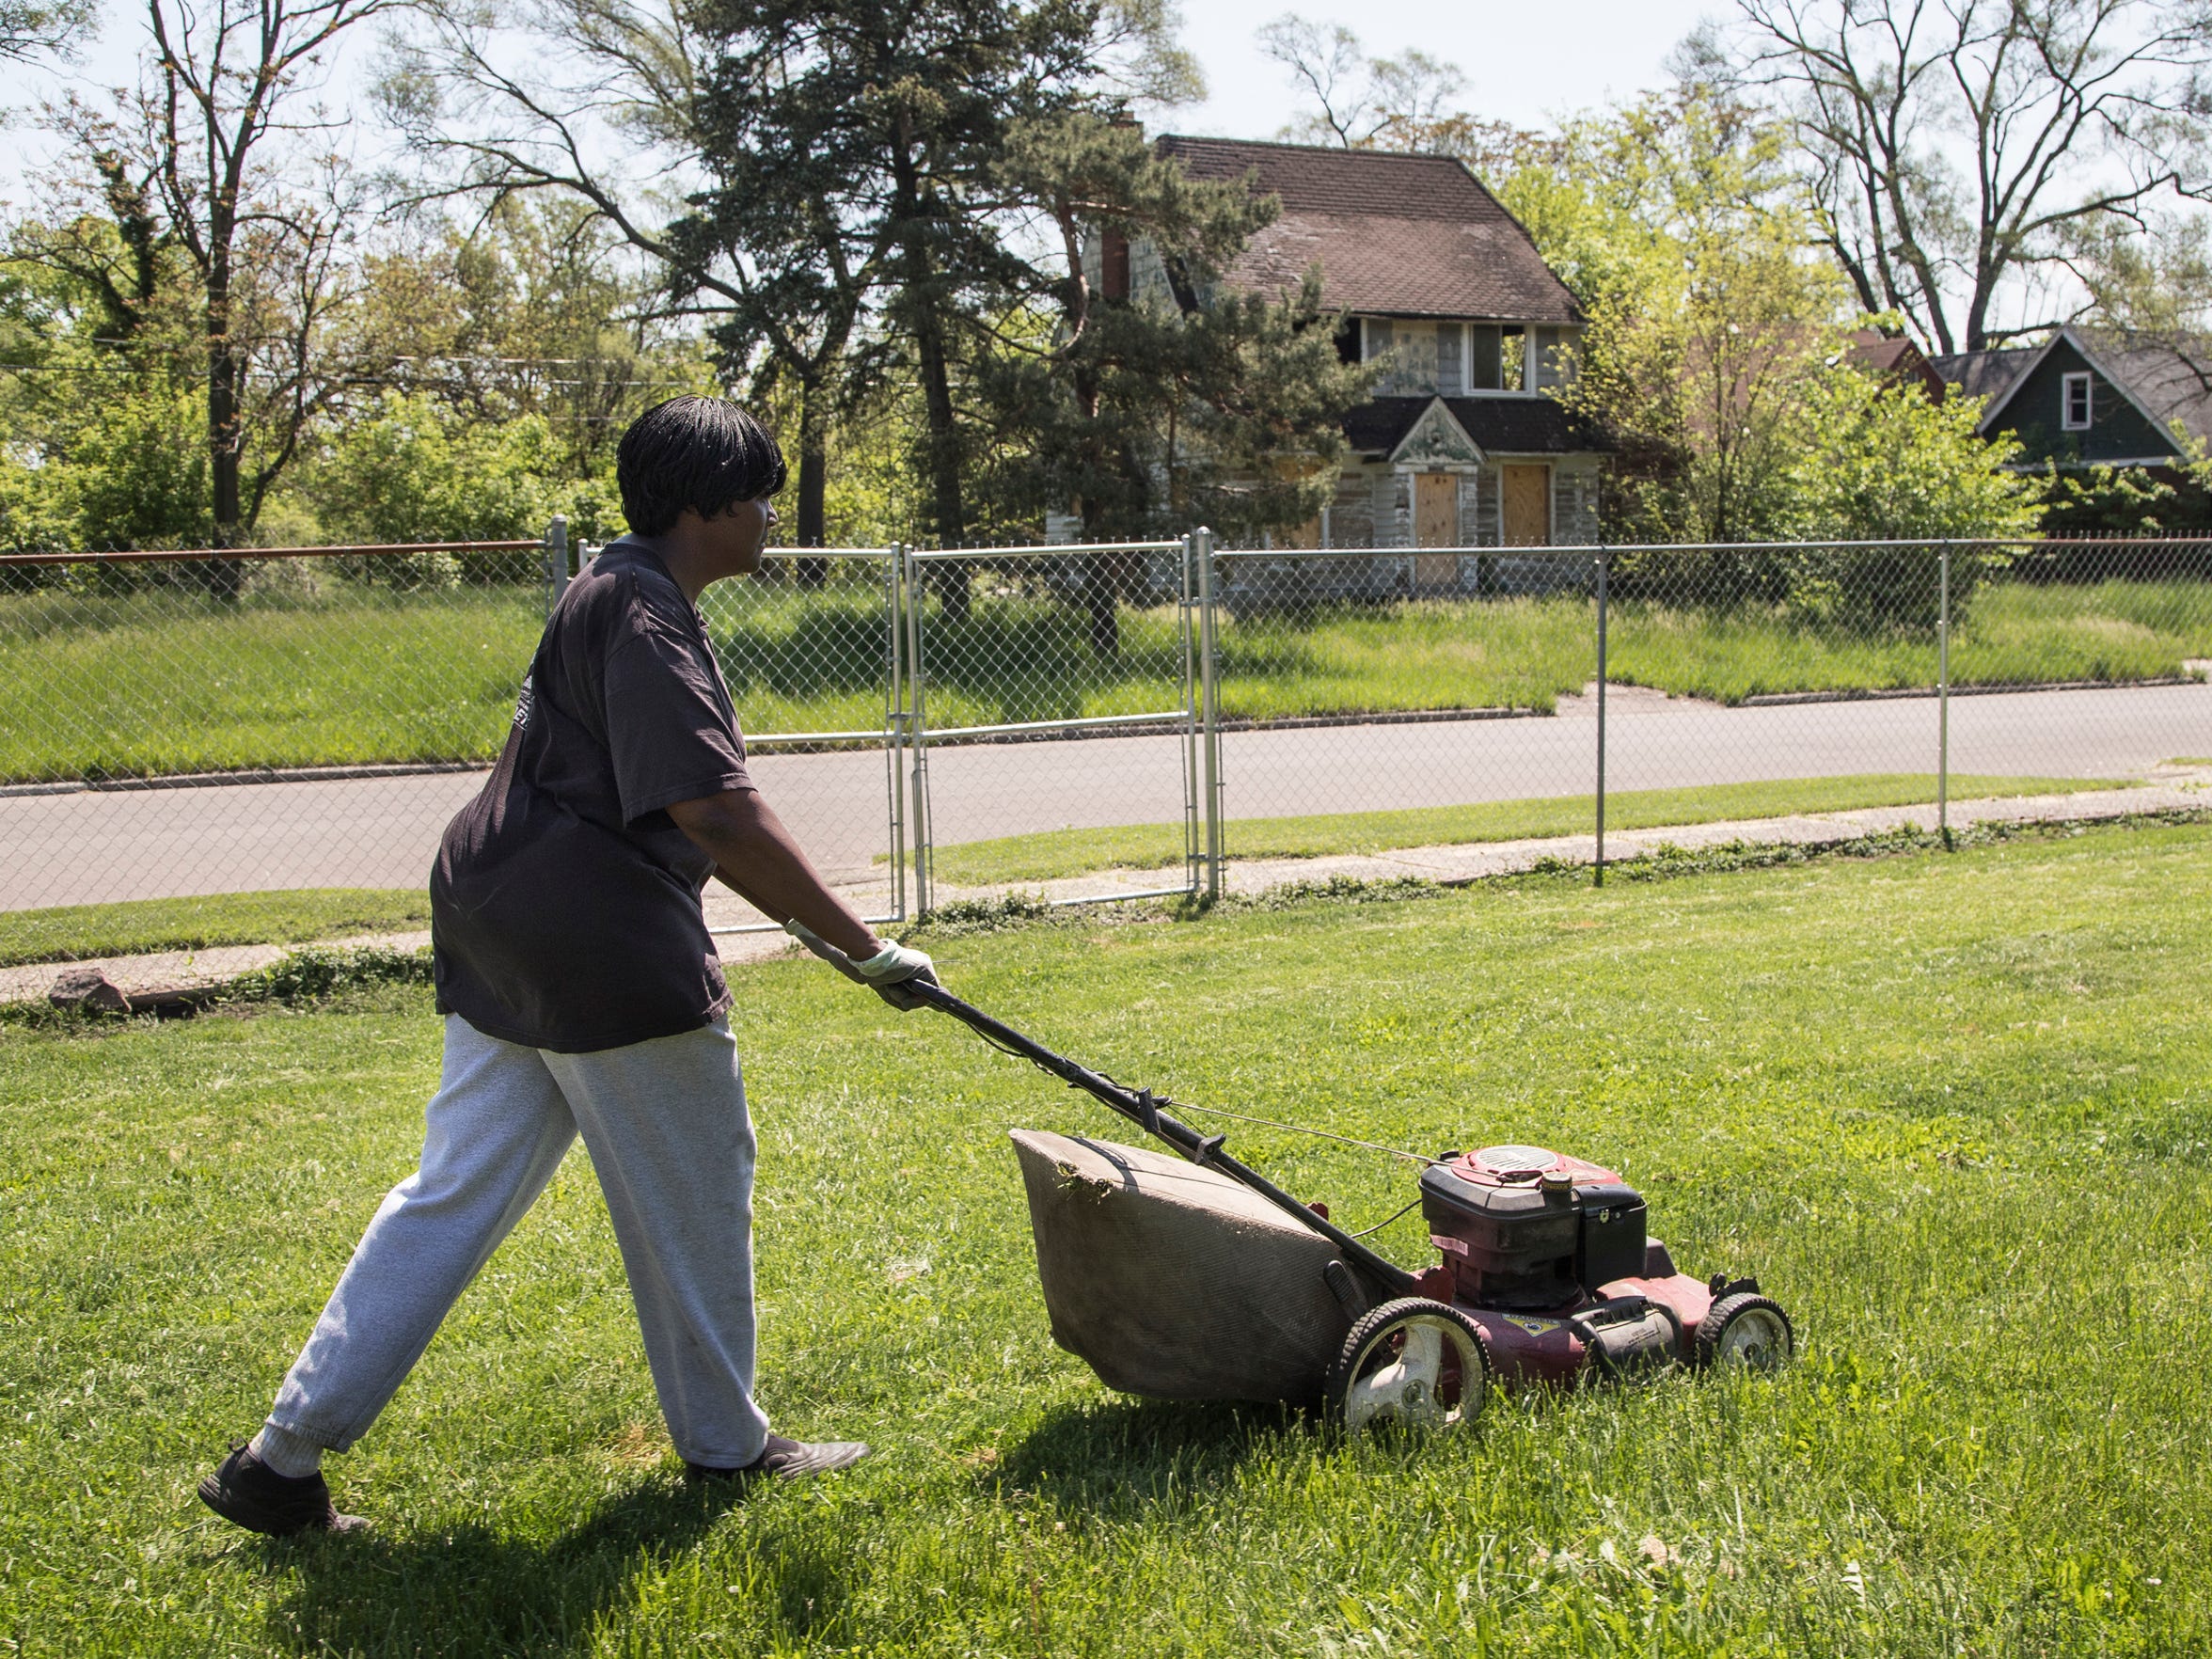 Anna Hollins in May mows the yard of her Lauder Street home, which sits across from a land bank house investigated for possible dog fighting. (Photo taken May 25, 2018)